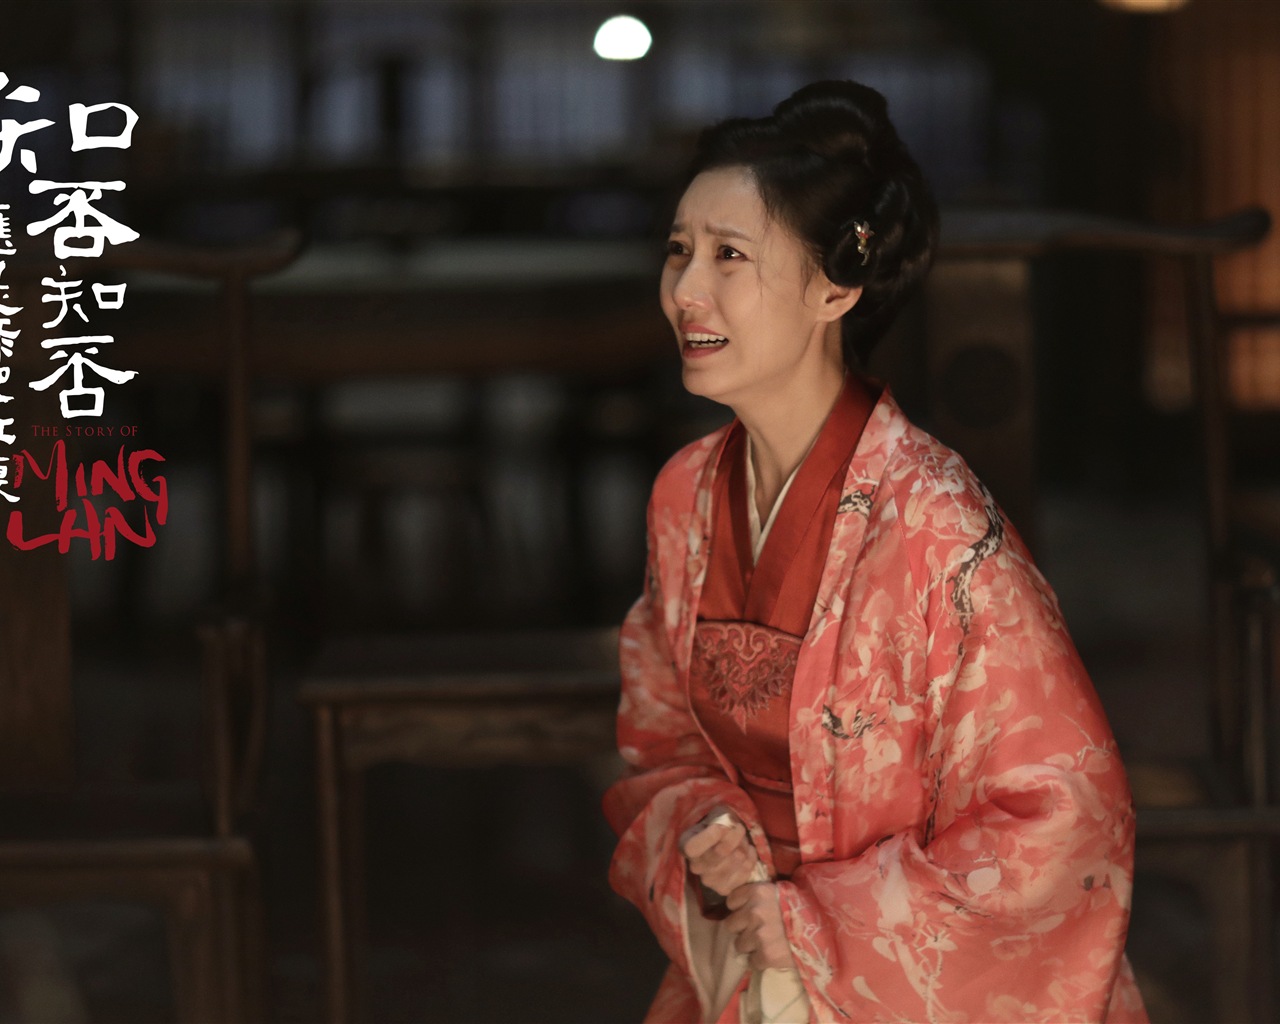 The Story Of MingLan, TV series HD wallpapers #17 - 1280x1024